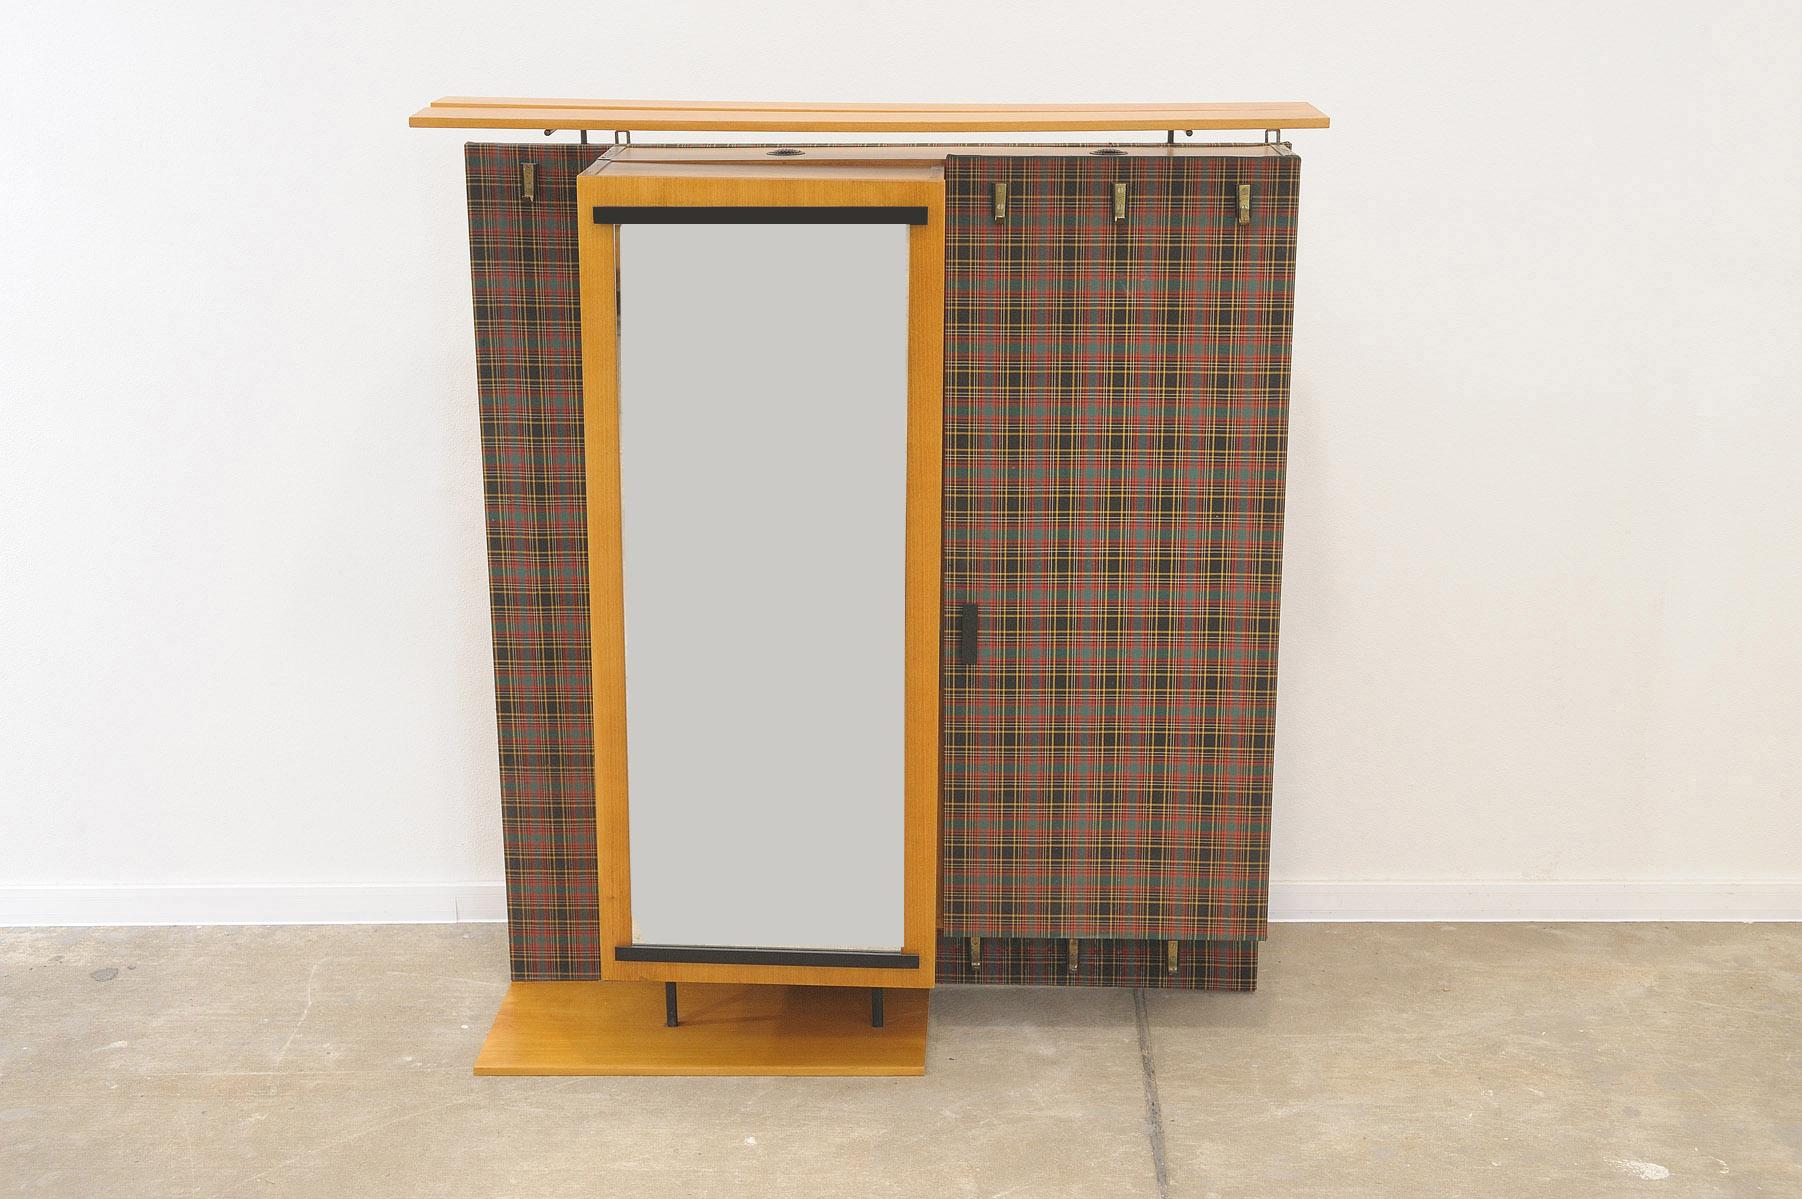 This multi-purpose hall coat and shoe rack was made in Germany in 1969 by AGP – Holz company.
Material: ashwood, metal, fabric, glass.
It can be mounted on the wall with two screws. An interesting example of German mid-century design.
The rack is in